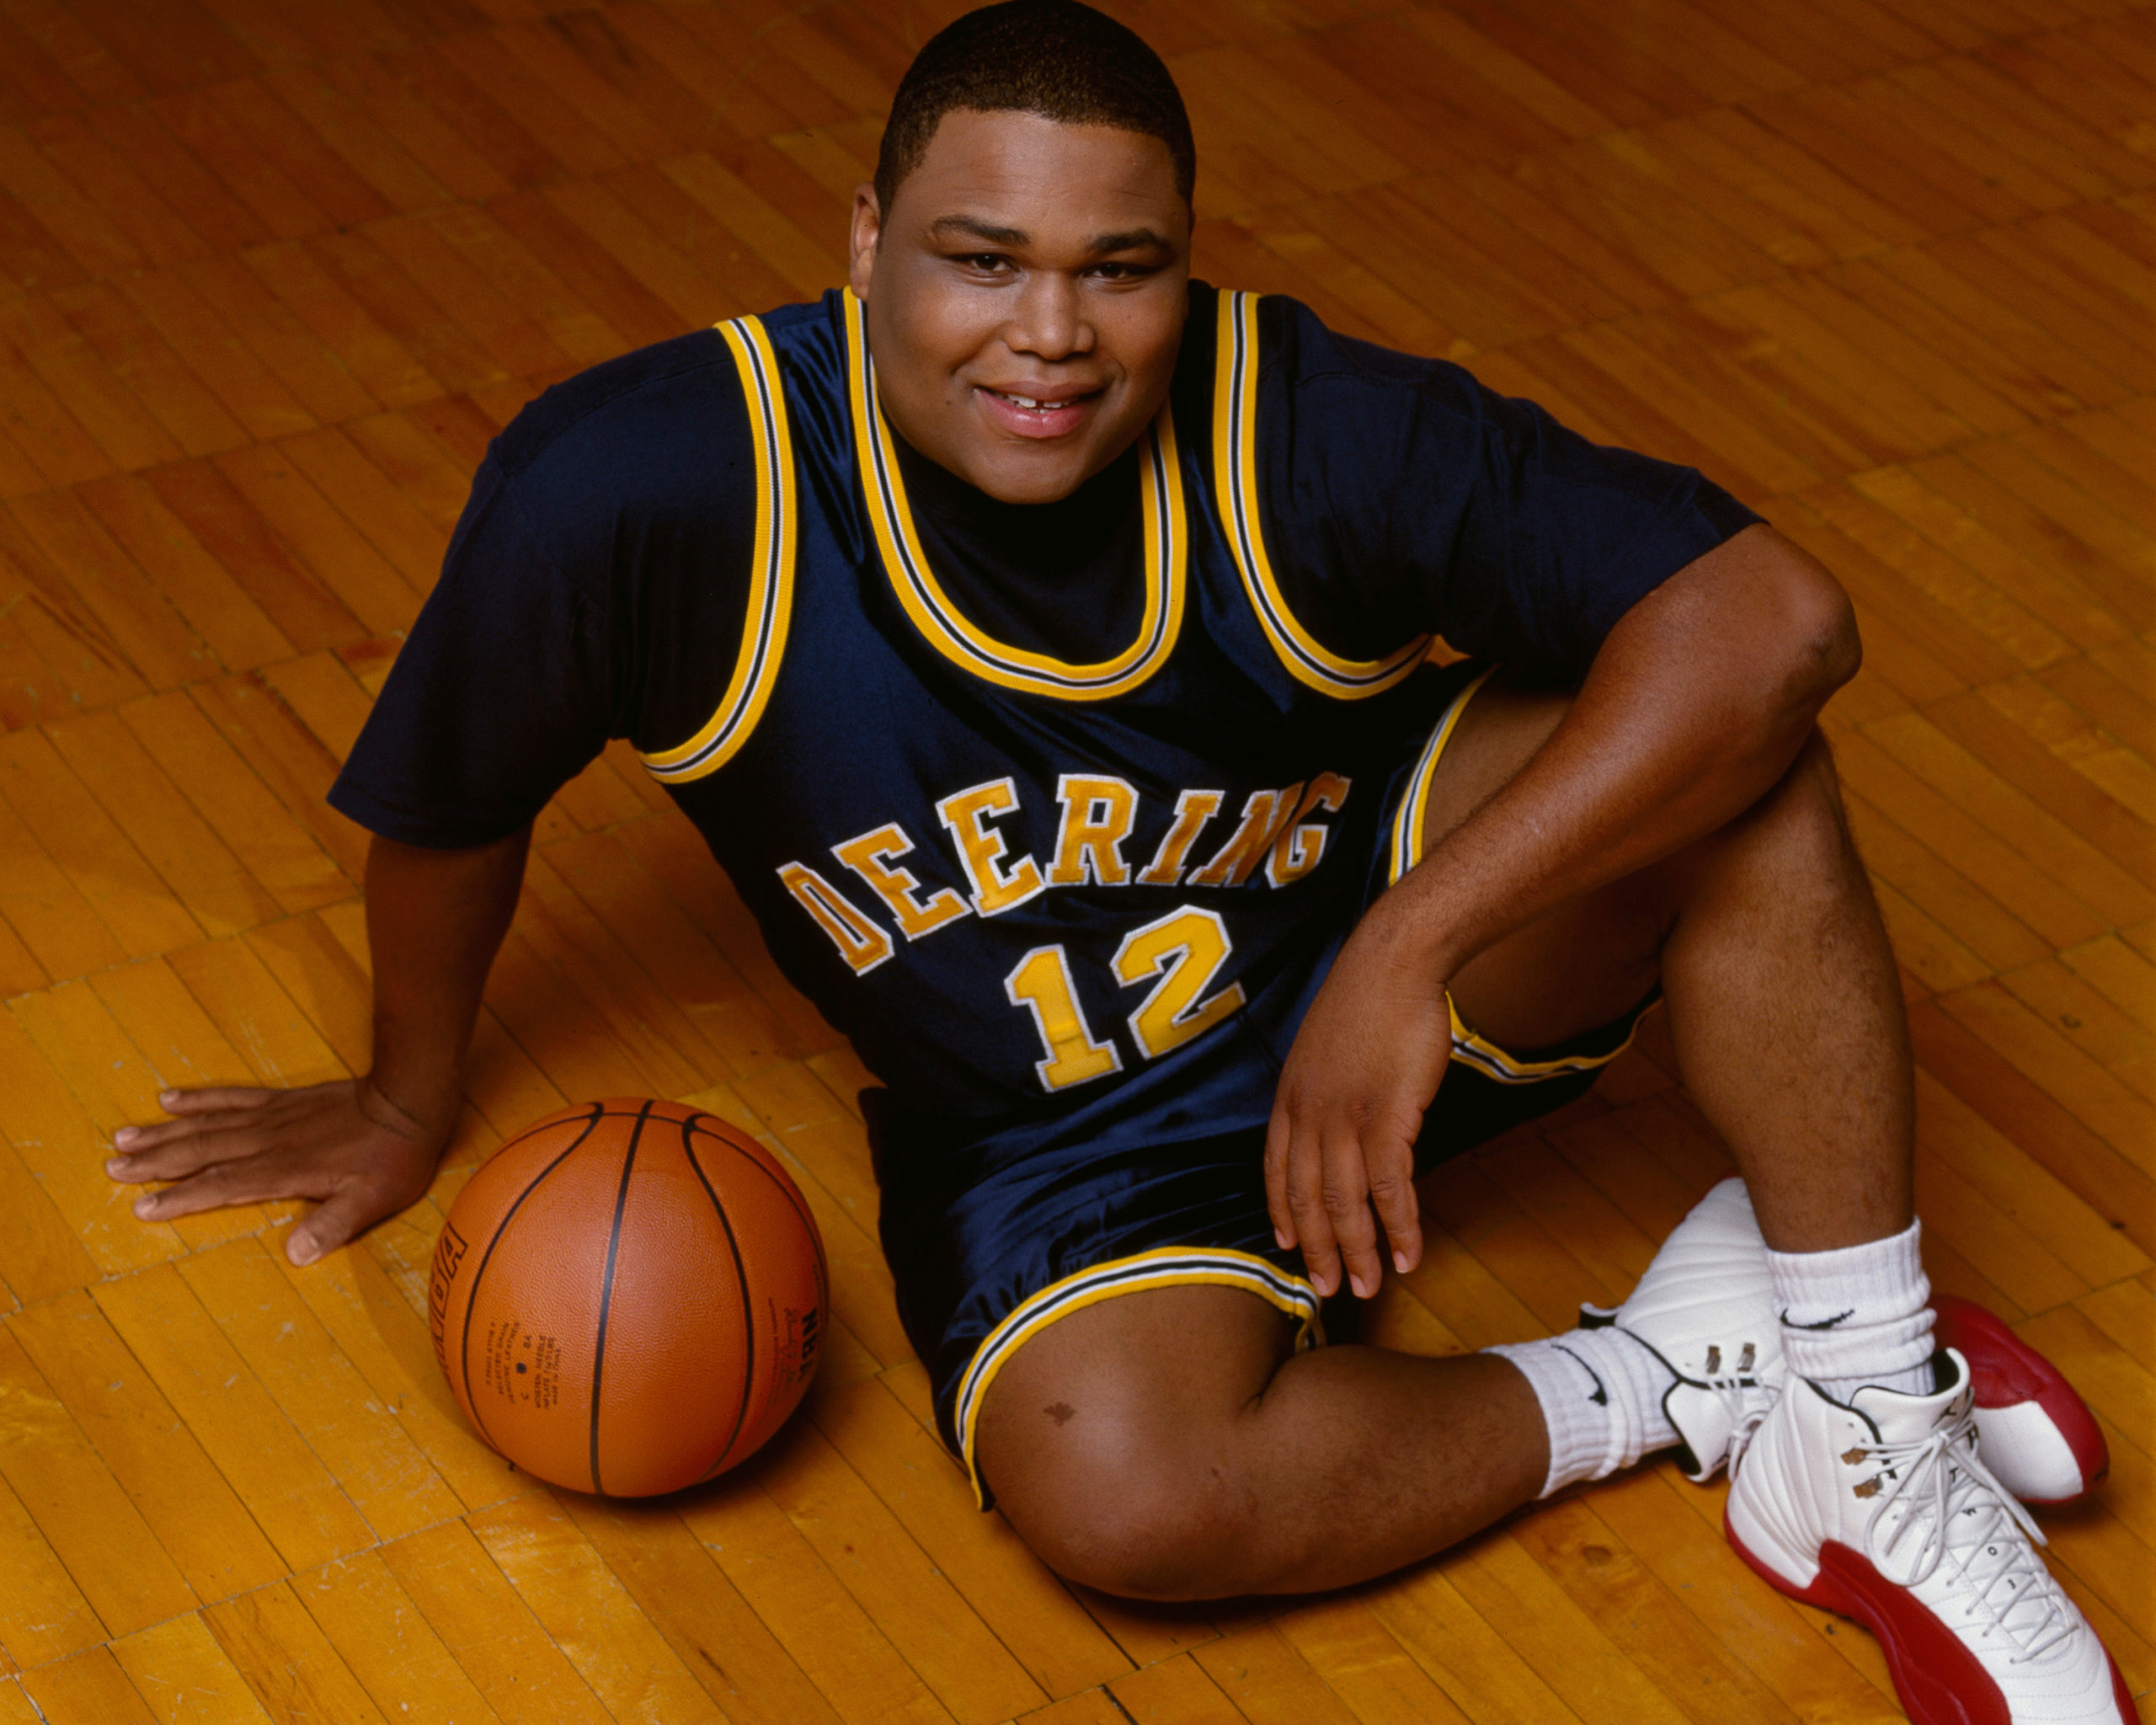 Hang Time - Anthony Anderson